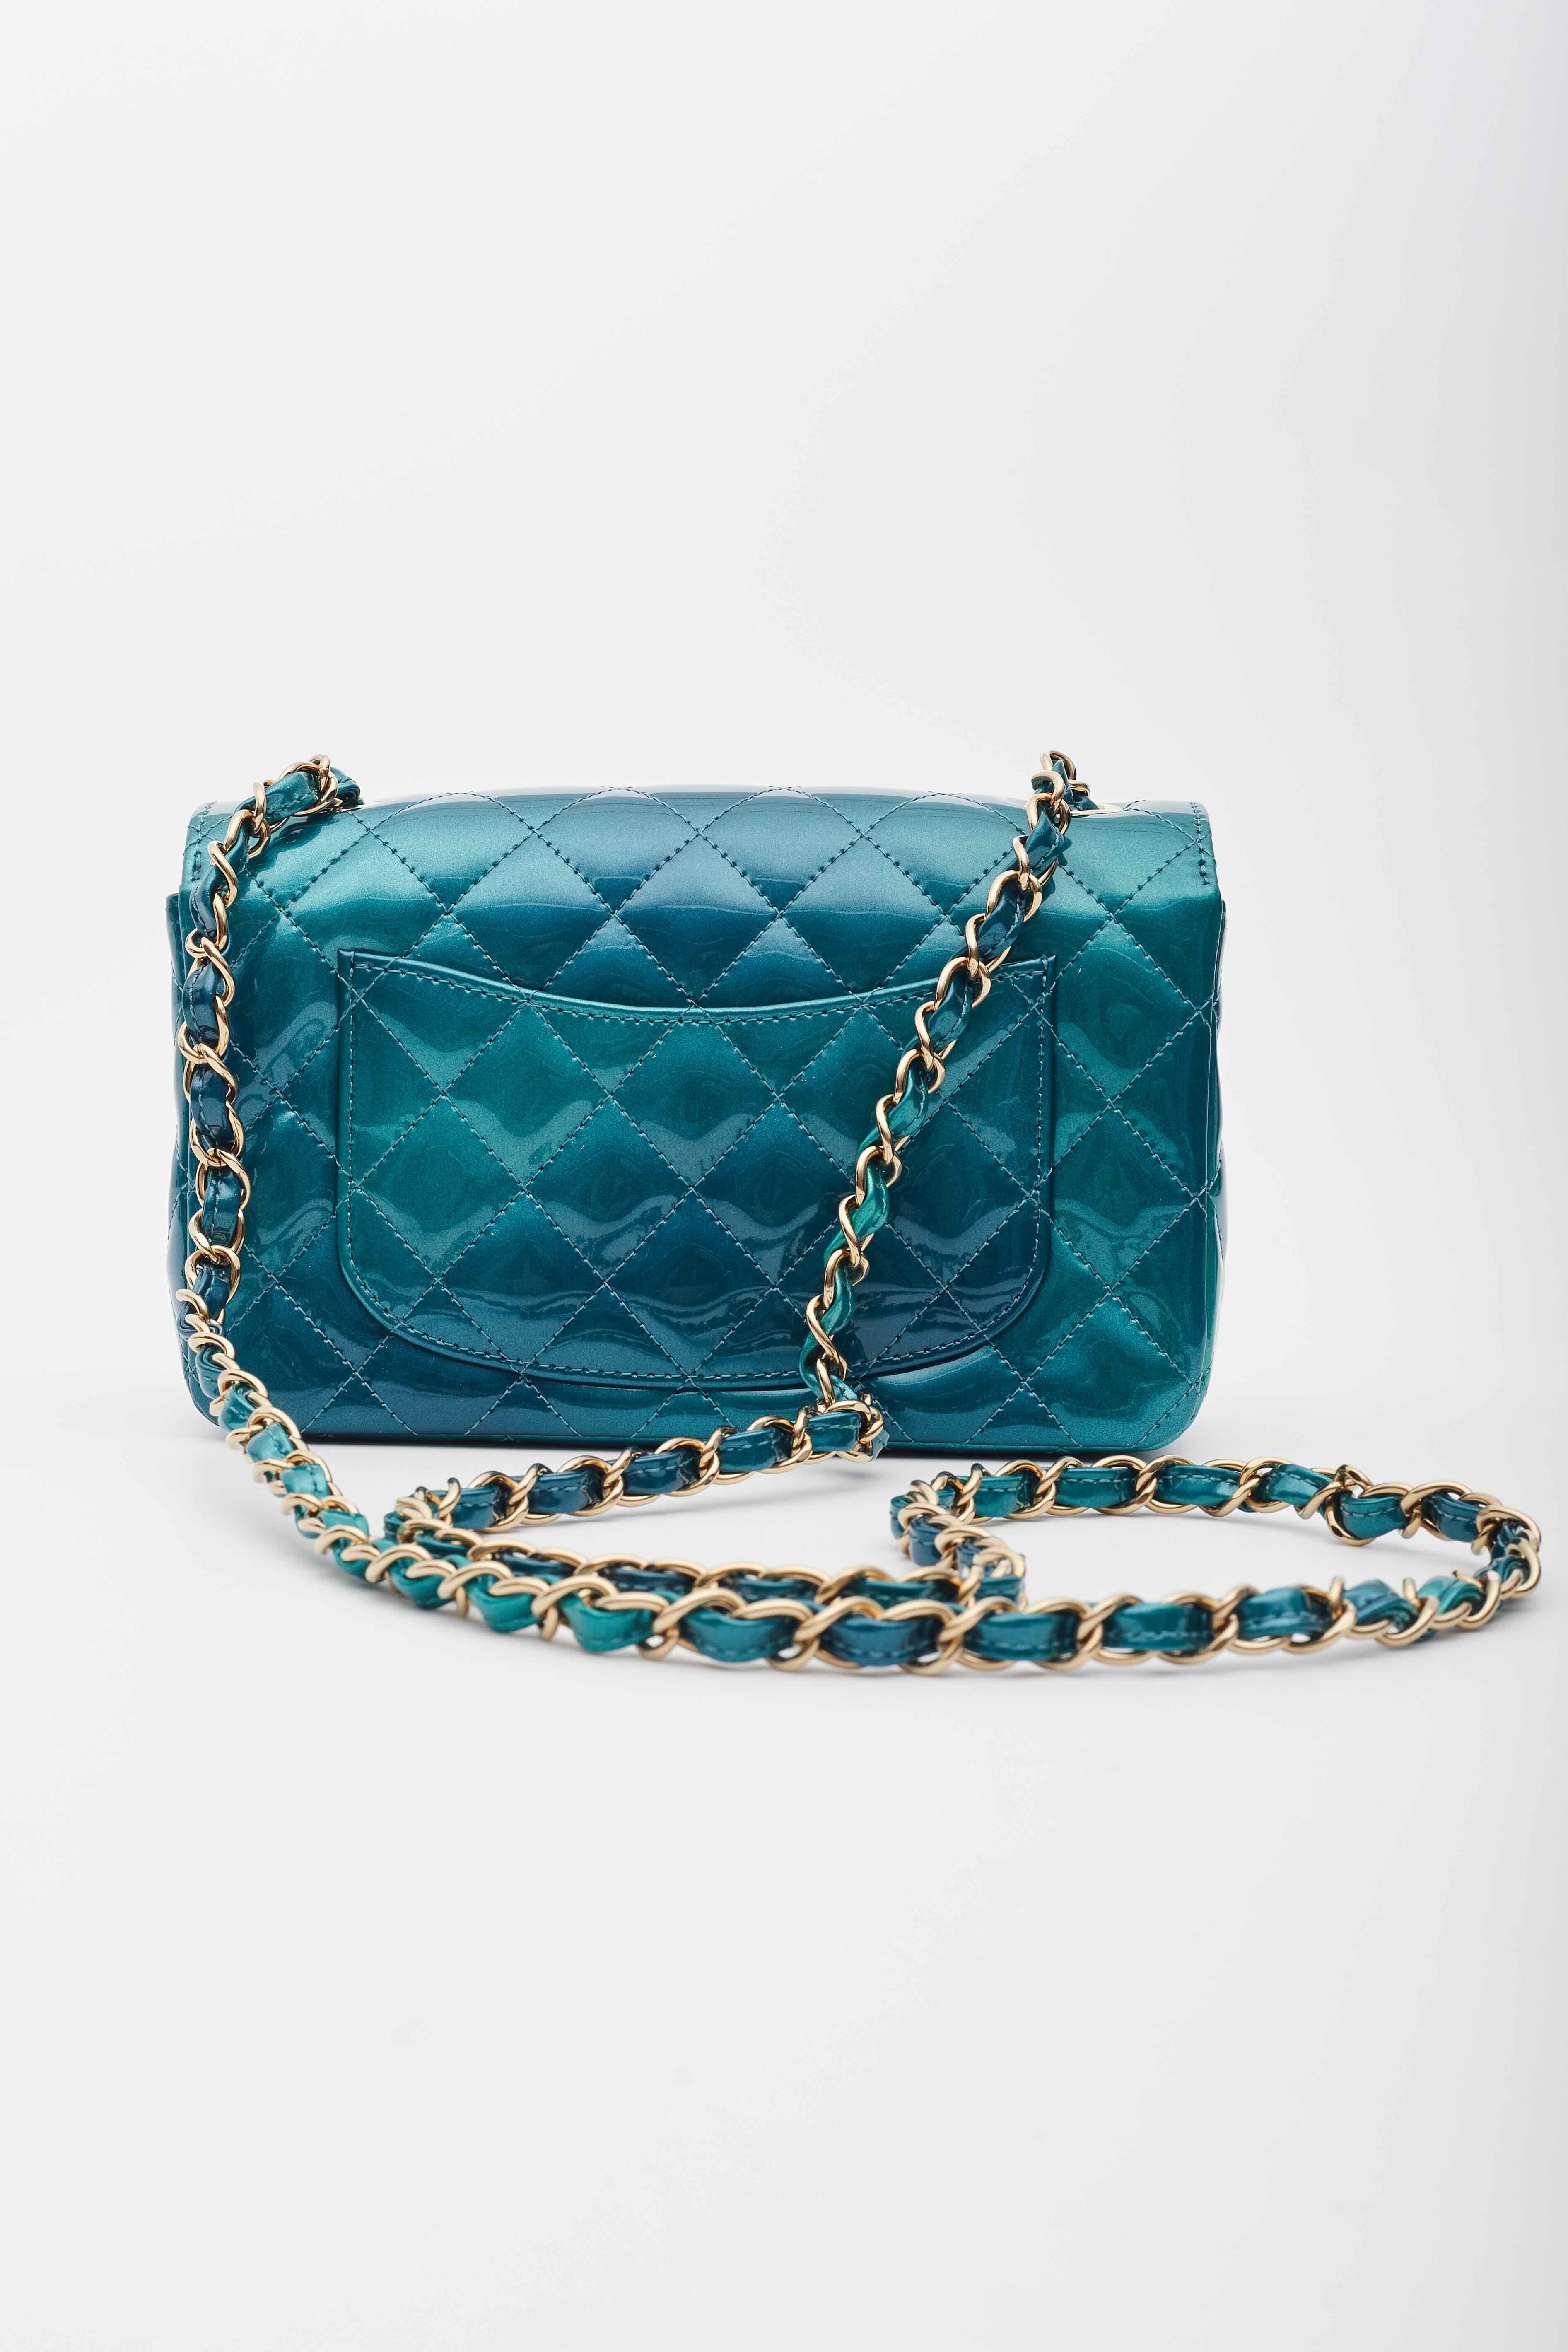 This bag is made out of luxurious diamond quilted iridescent patent leather in gradient blue to green. The bag features a crossbody leather threaded gold chain link shoulder strap, a frontal flap, and a gold Chanel CC turn lock. This opens to a blue